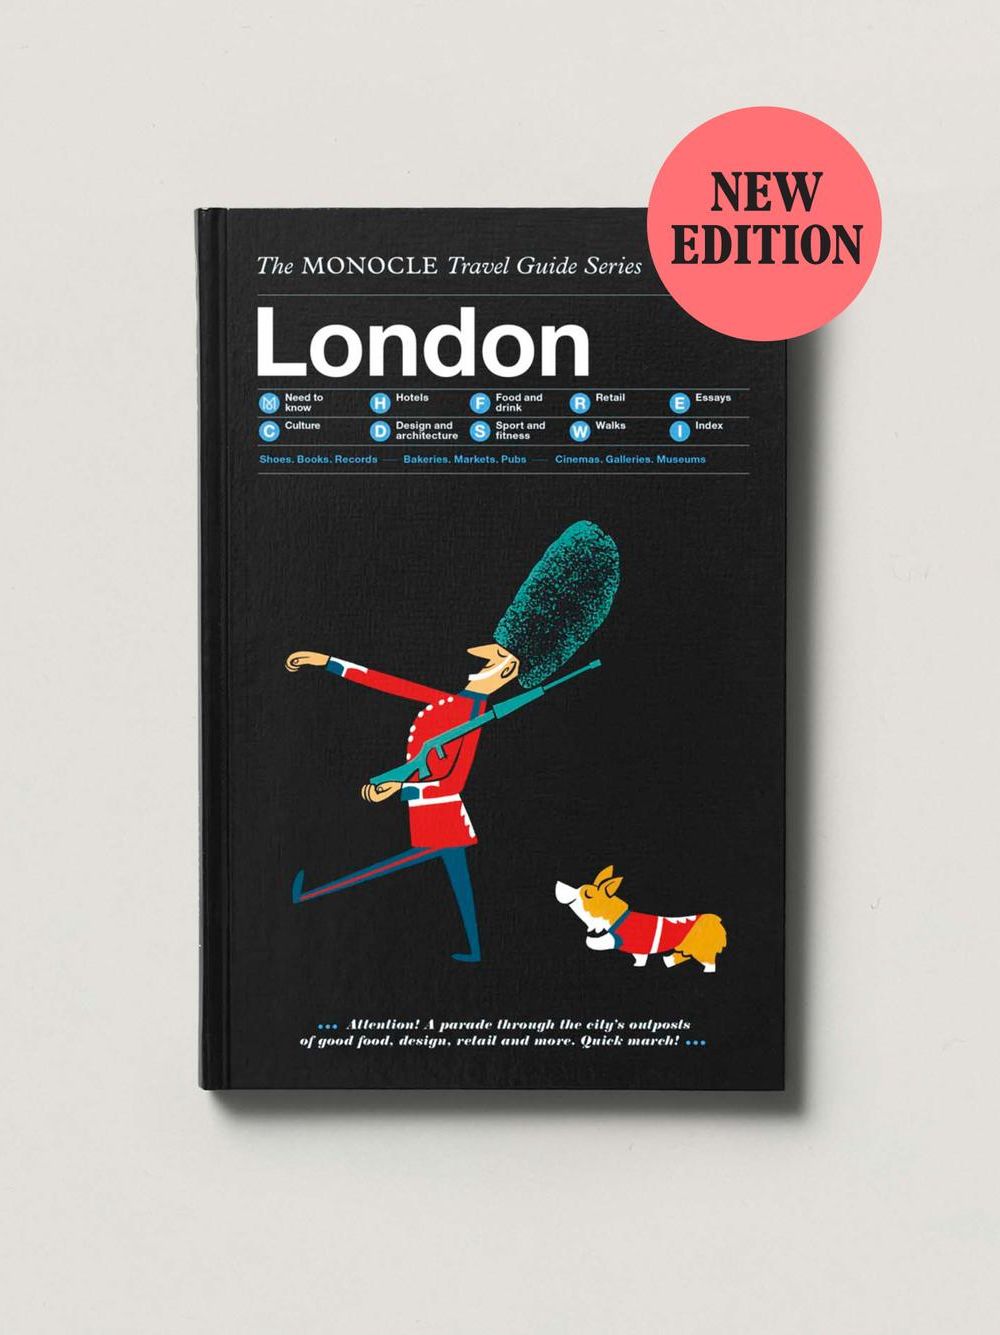 The Monocle Travel Guide, London